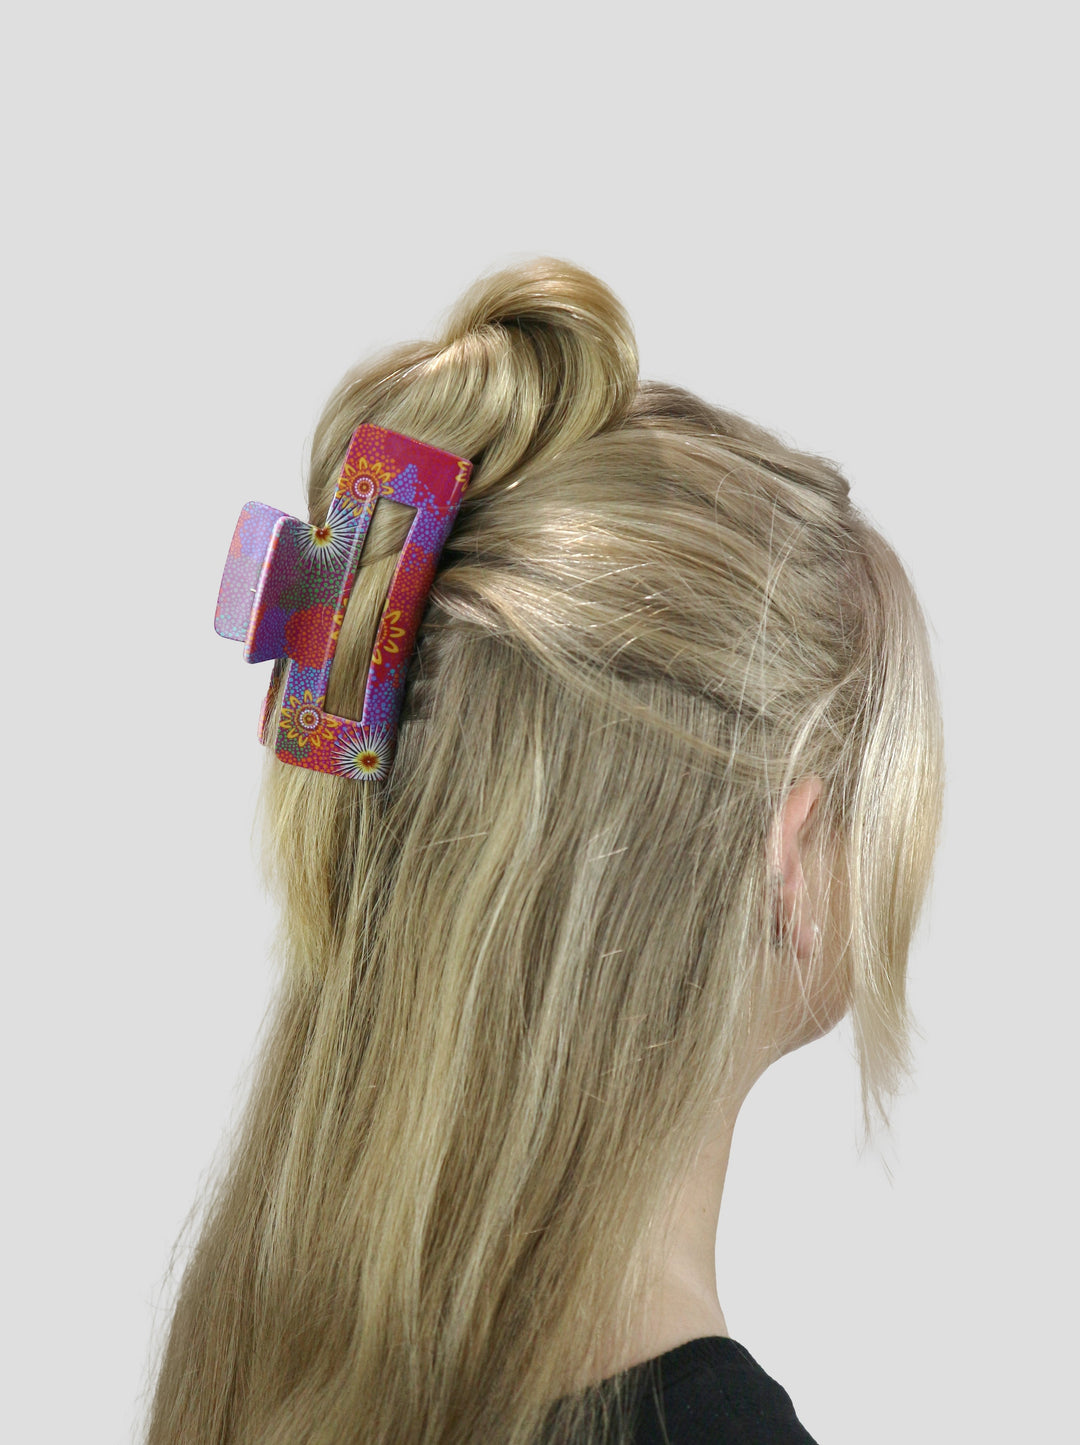 Get Up - Hair Accessories Kit